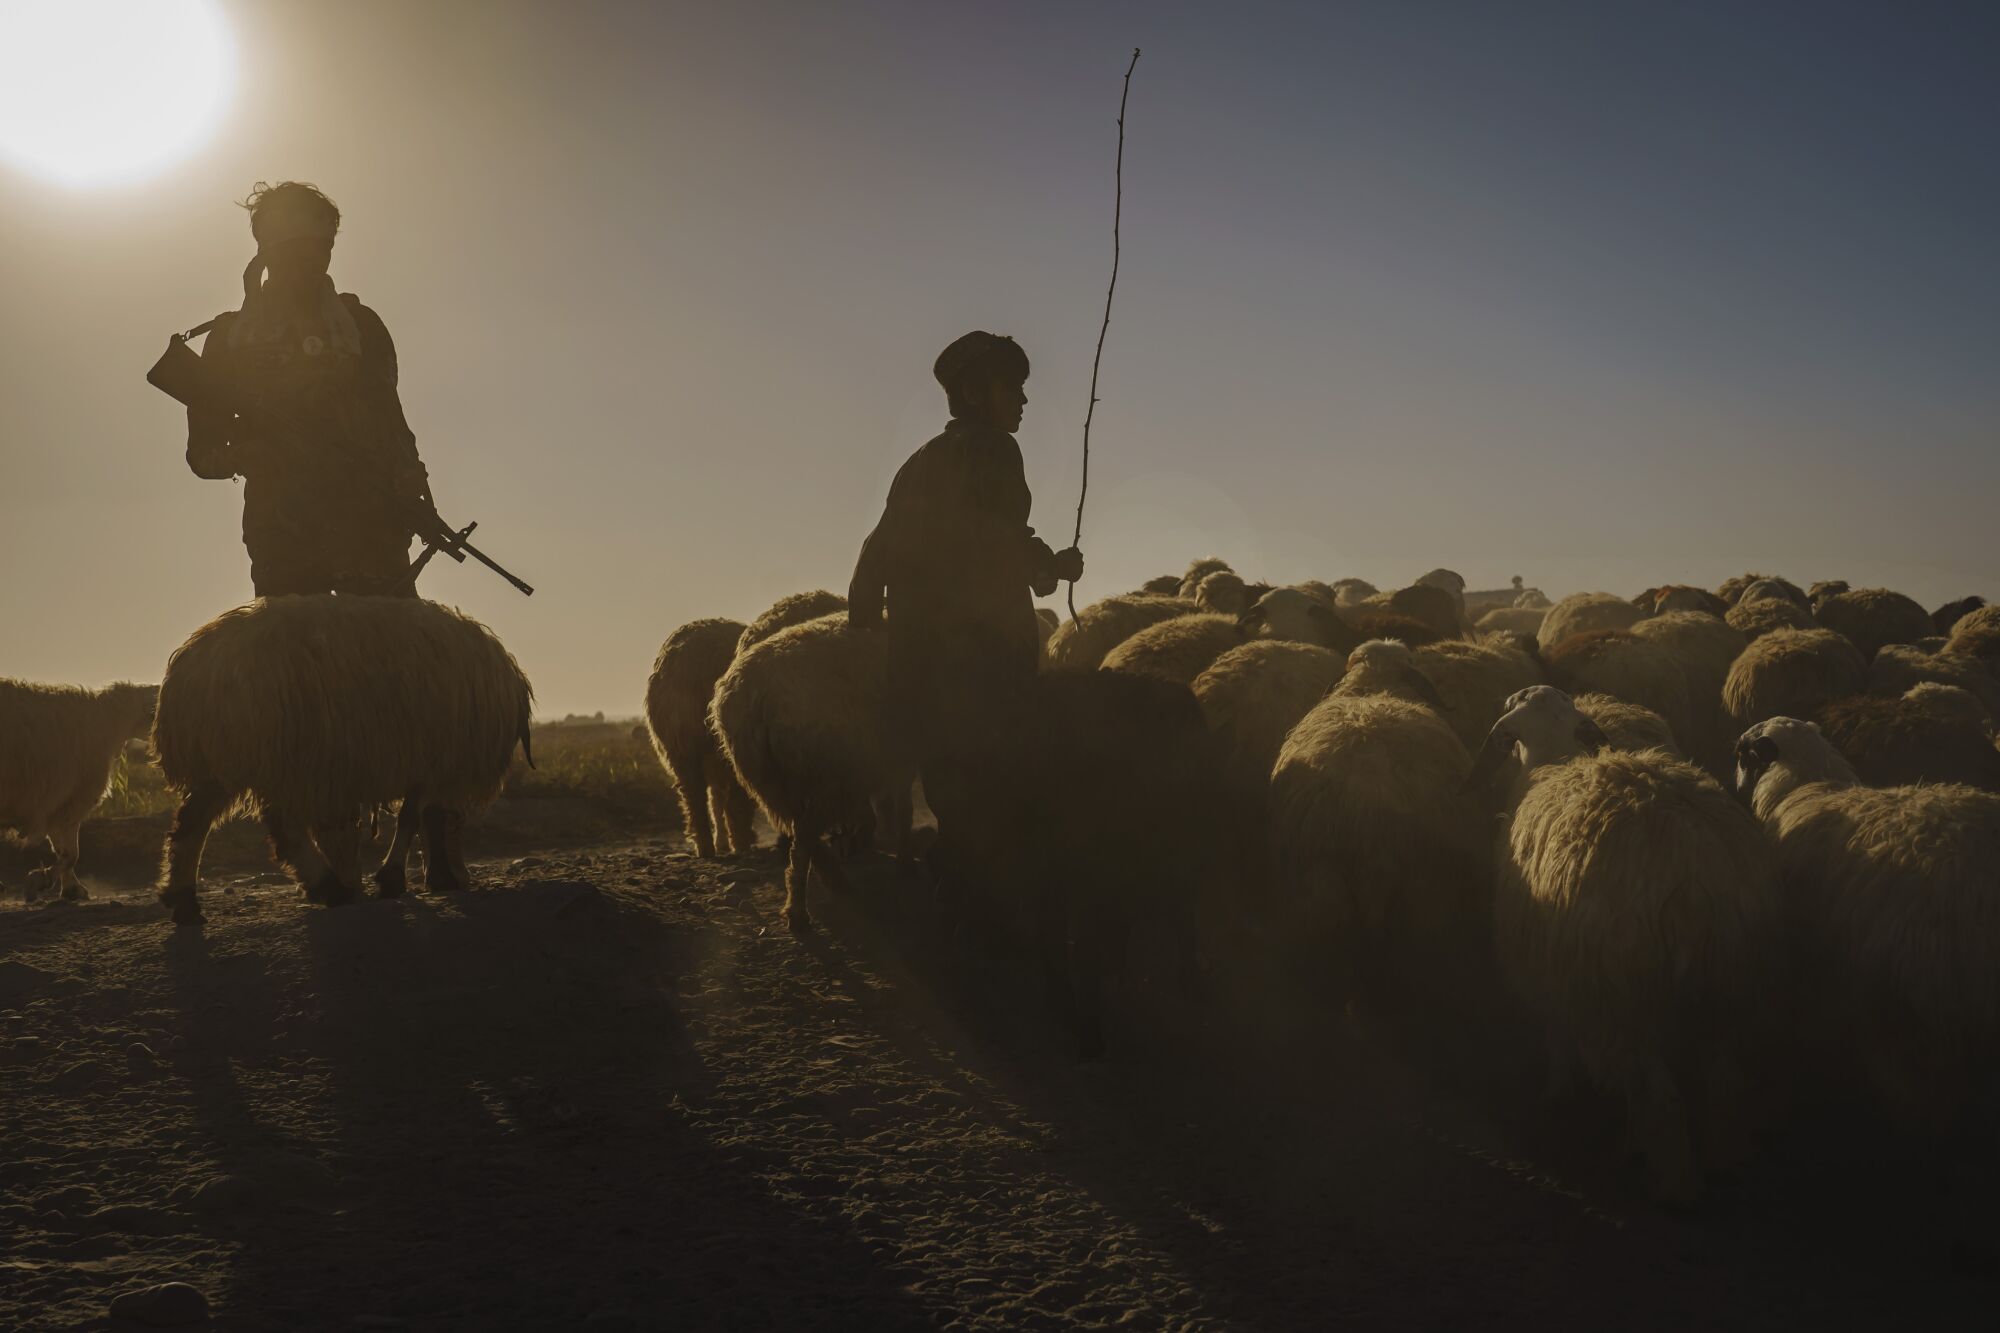 A police officer patrols a patch of land next to a shepherd and sheep.